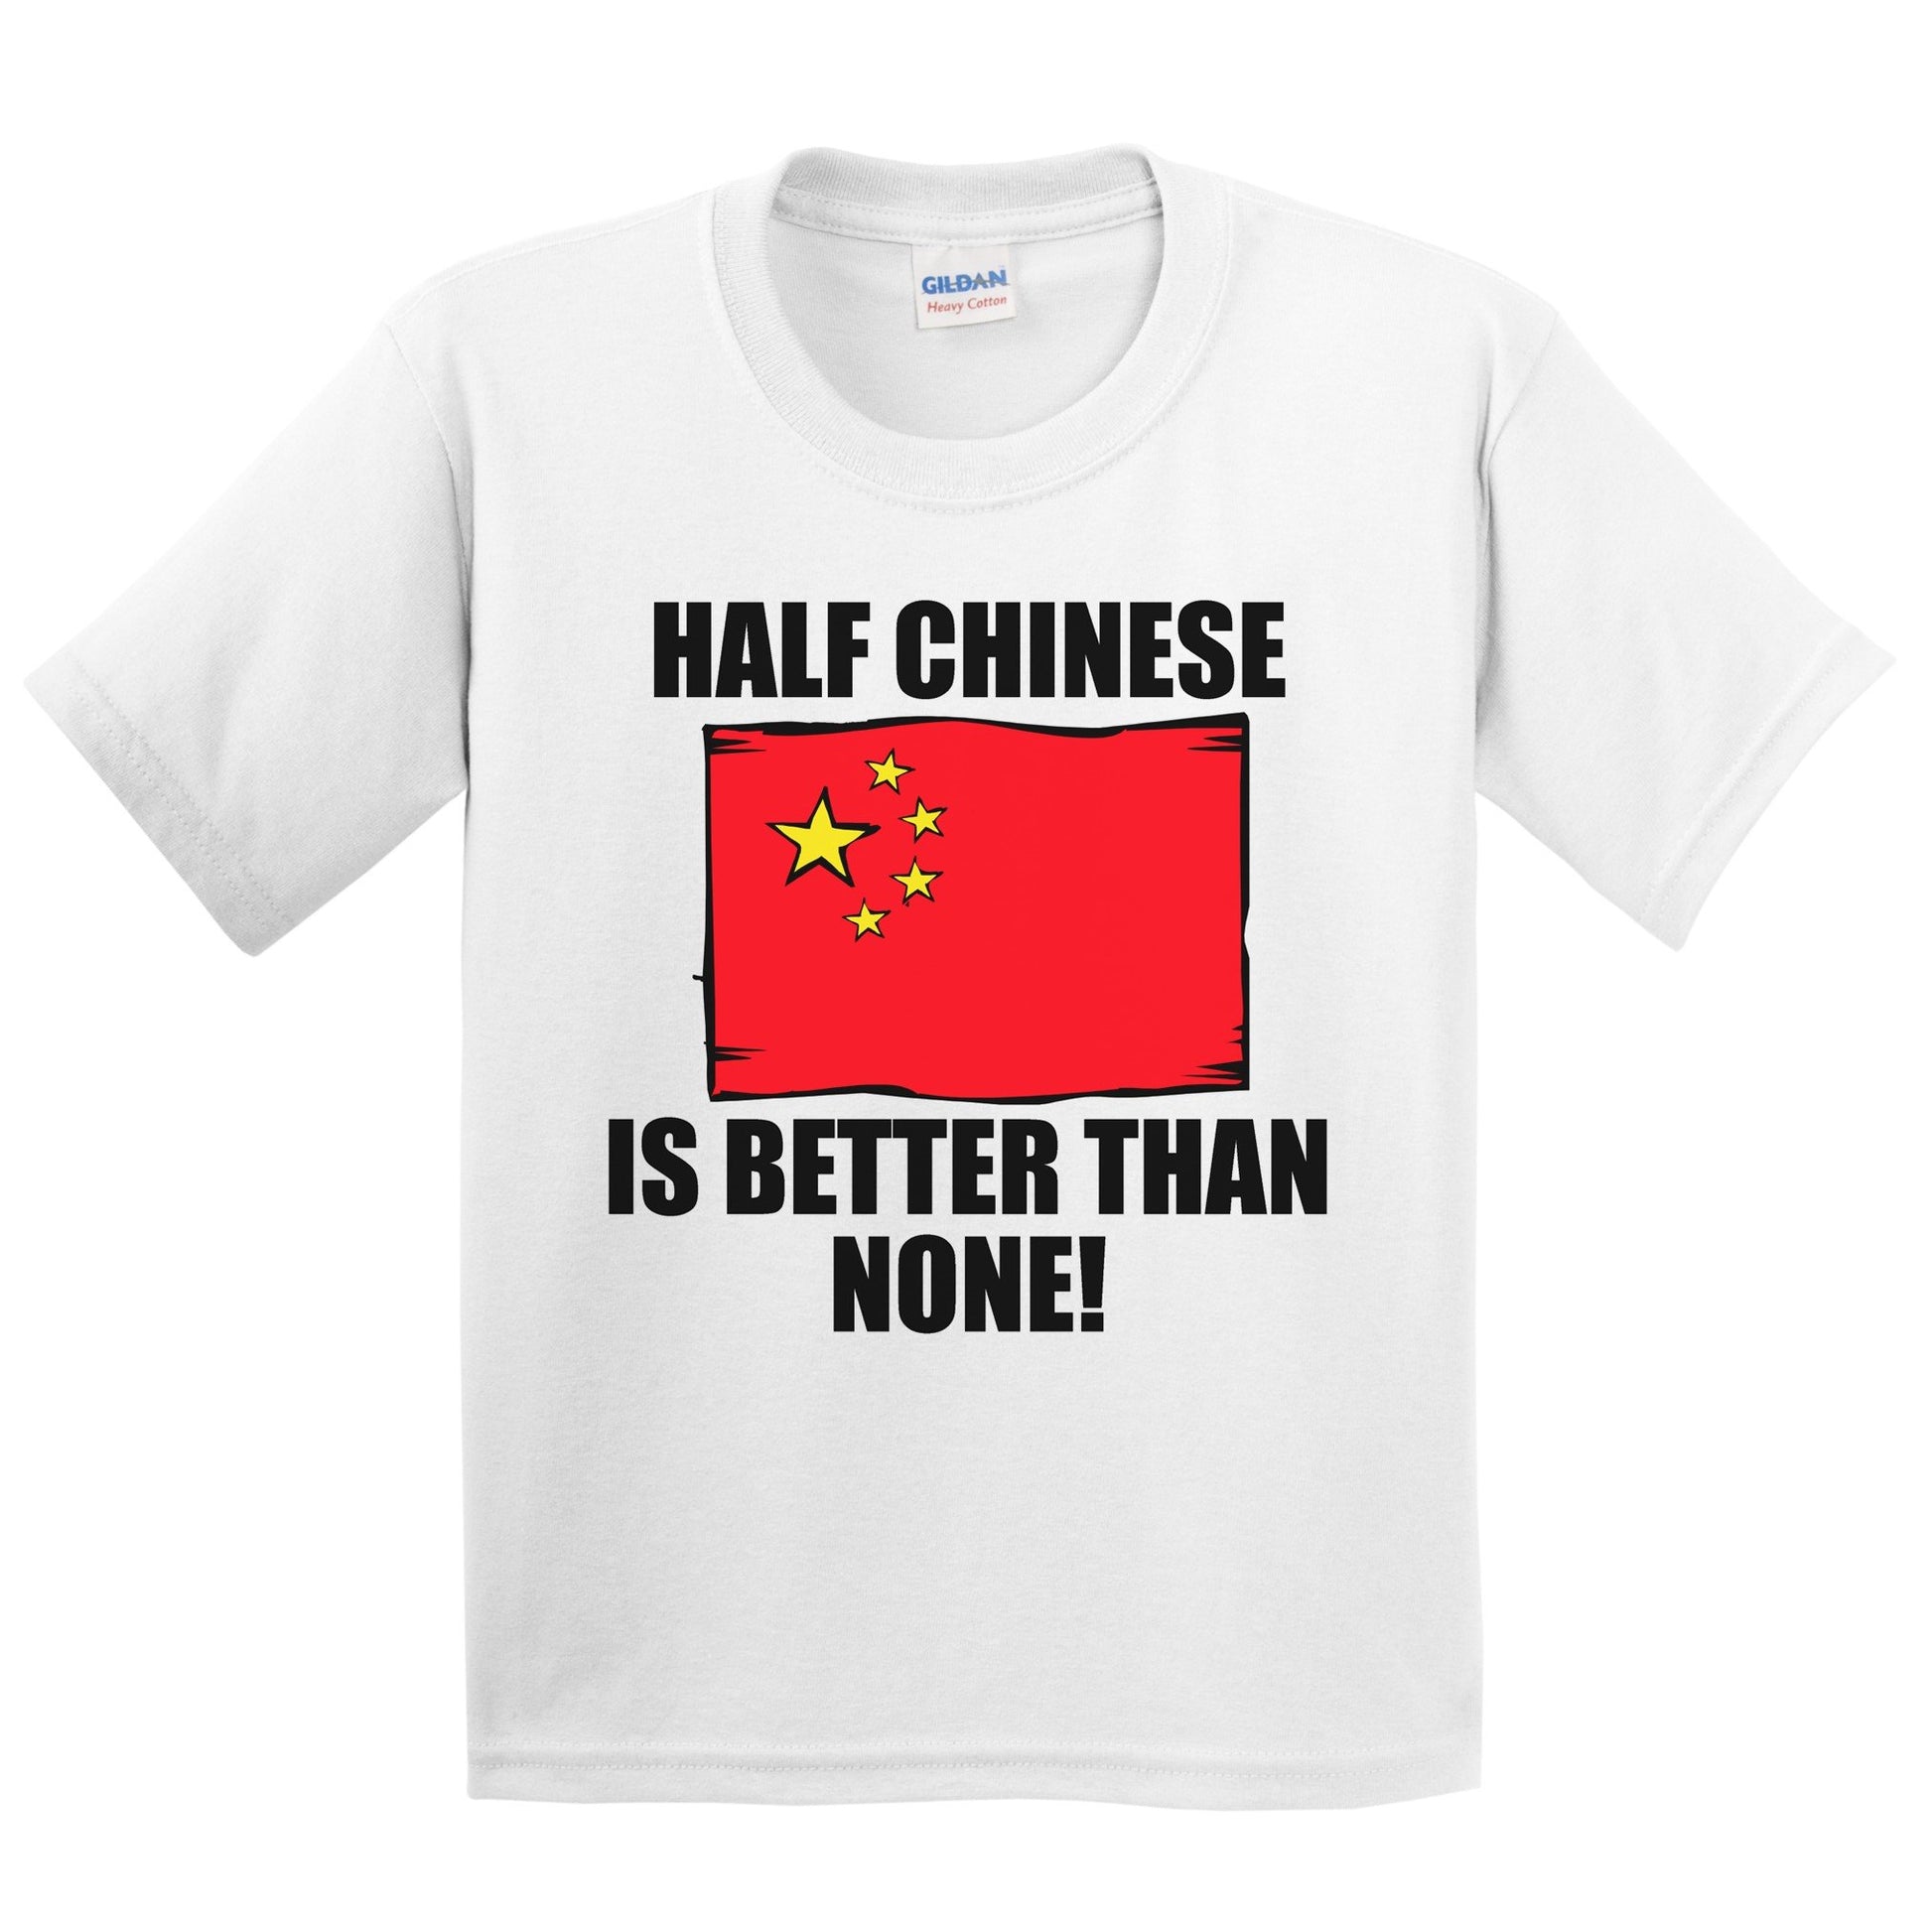 Half Chinese Is Better Than None Kids Youth T-Shirt